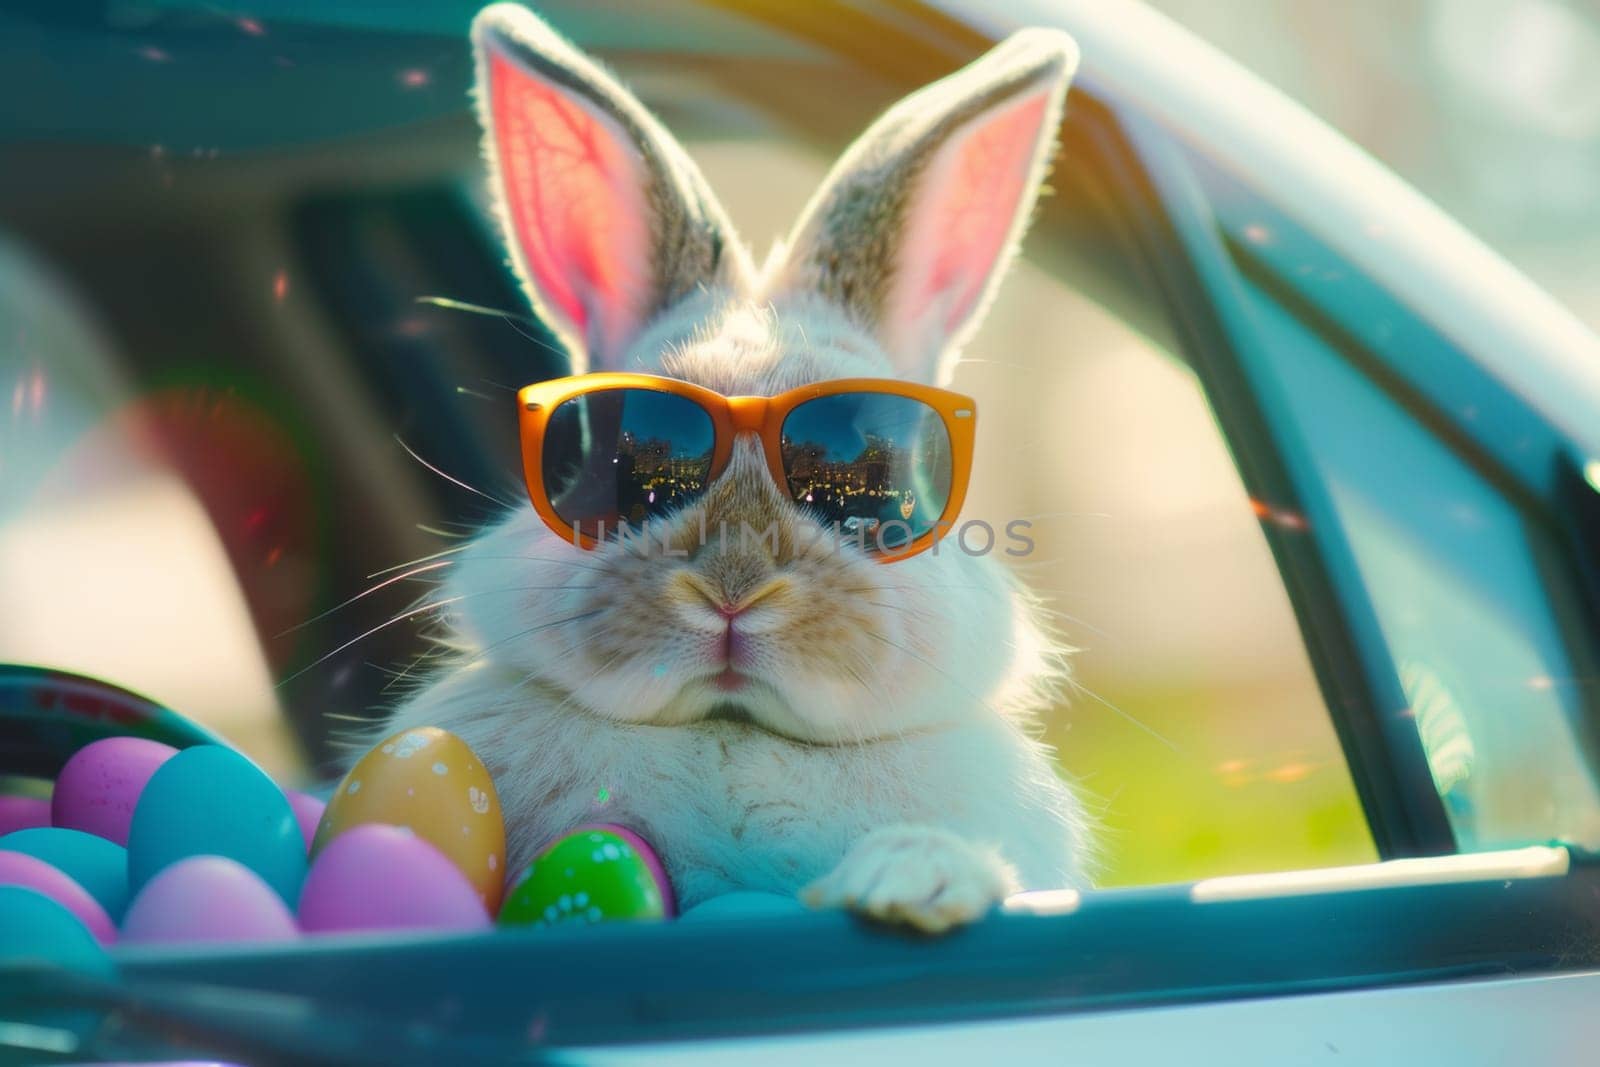 A rabbit wearing sunglasses and holding a basket of Easter eggs by nateemee